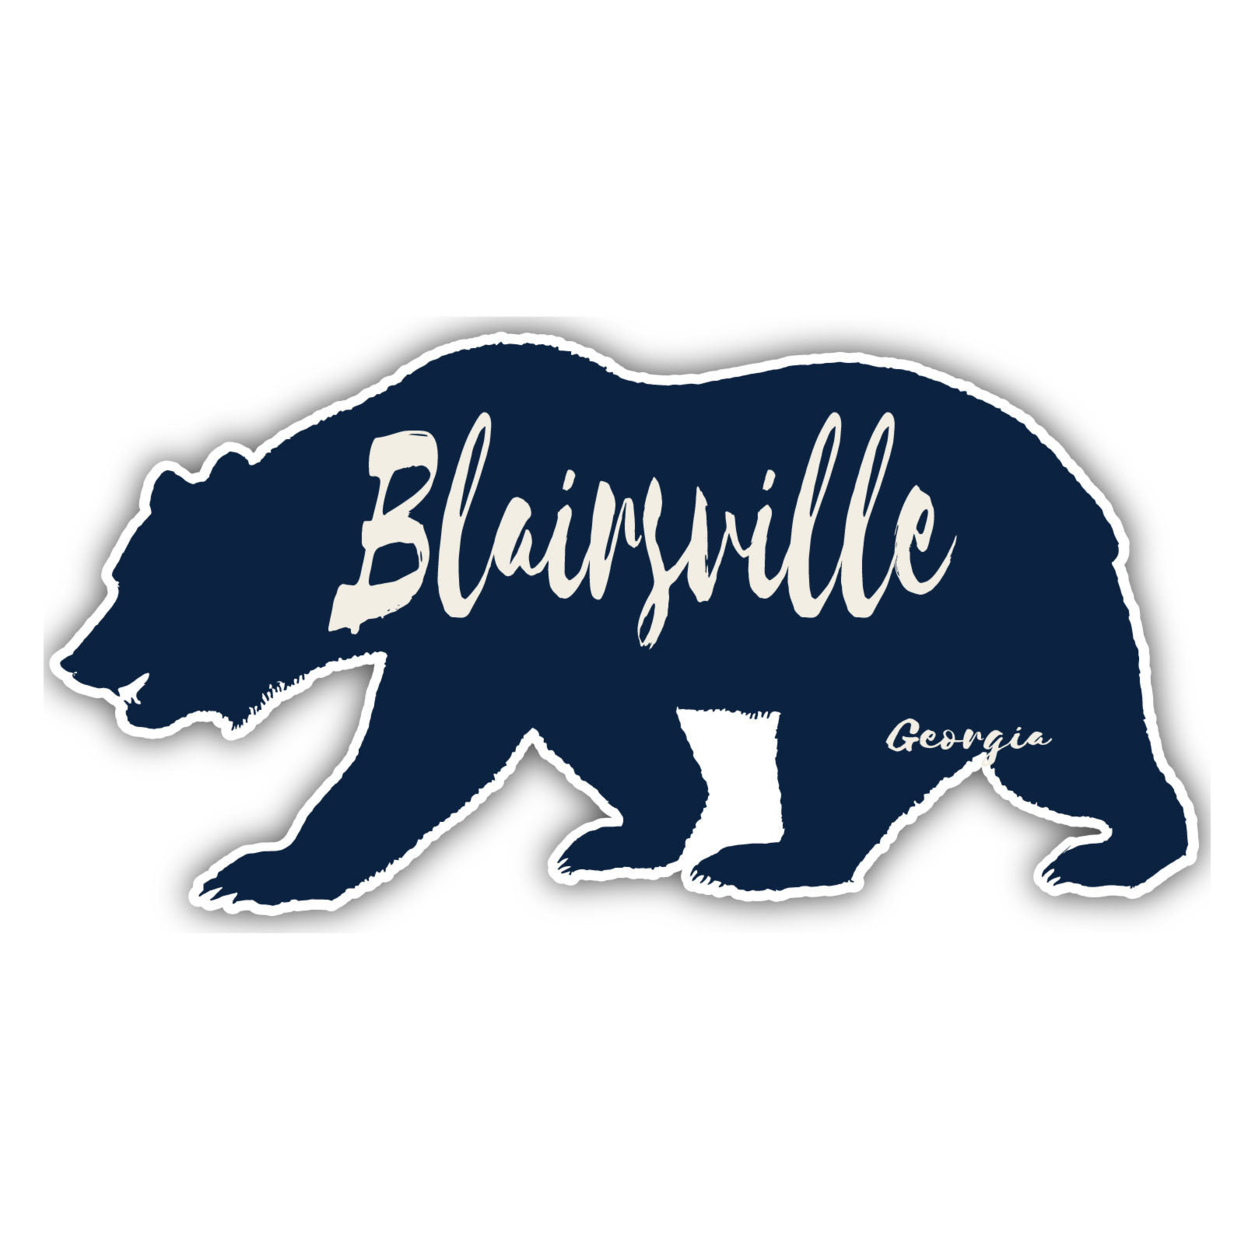 Blairsville Georgia Souvenir Decorative Stickers (Choose Theme And Size) - 4-Pack, 10-Inch, Adventures Awaits